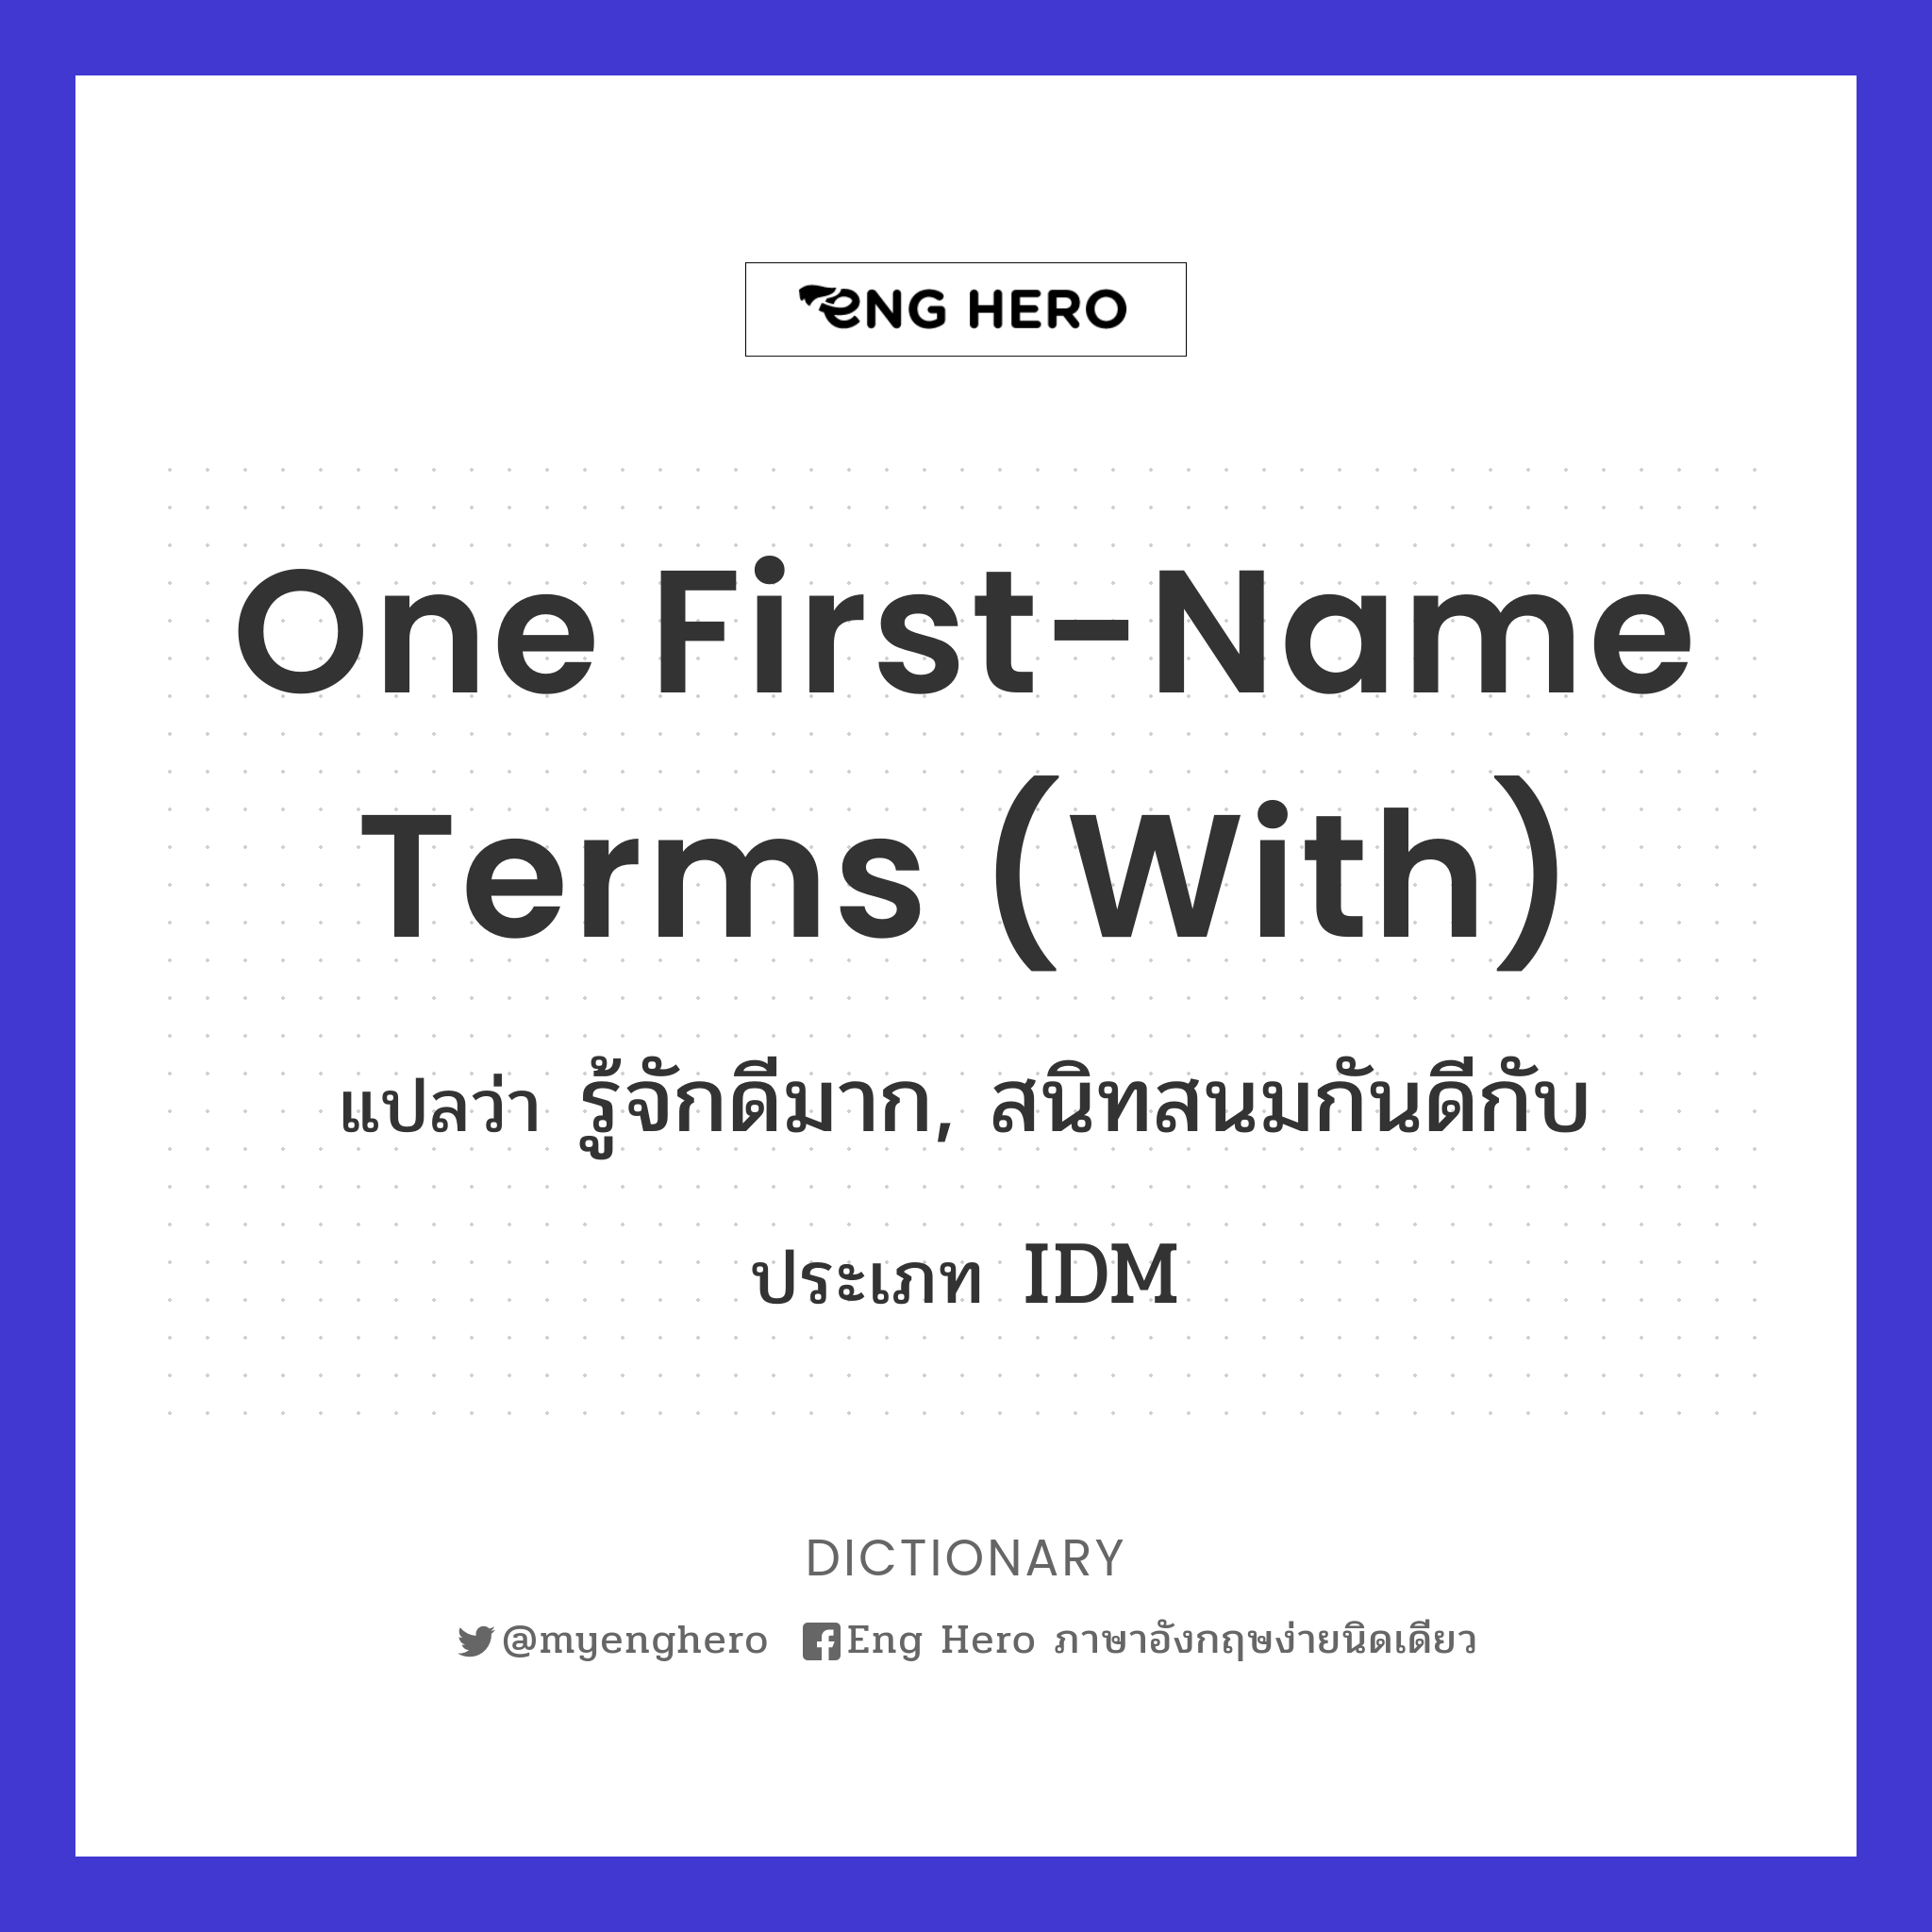 one first-name terms (with)